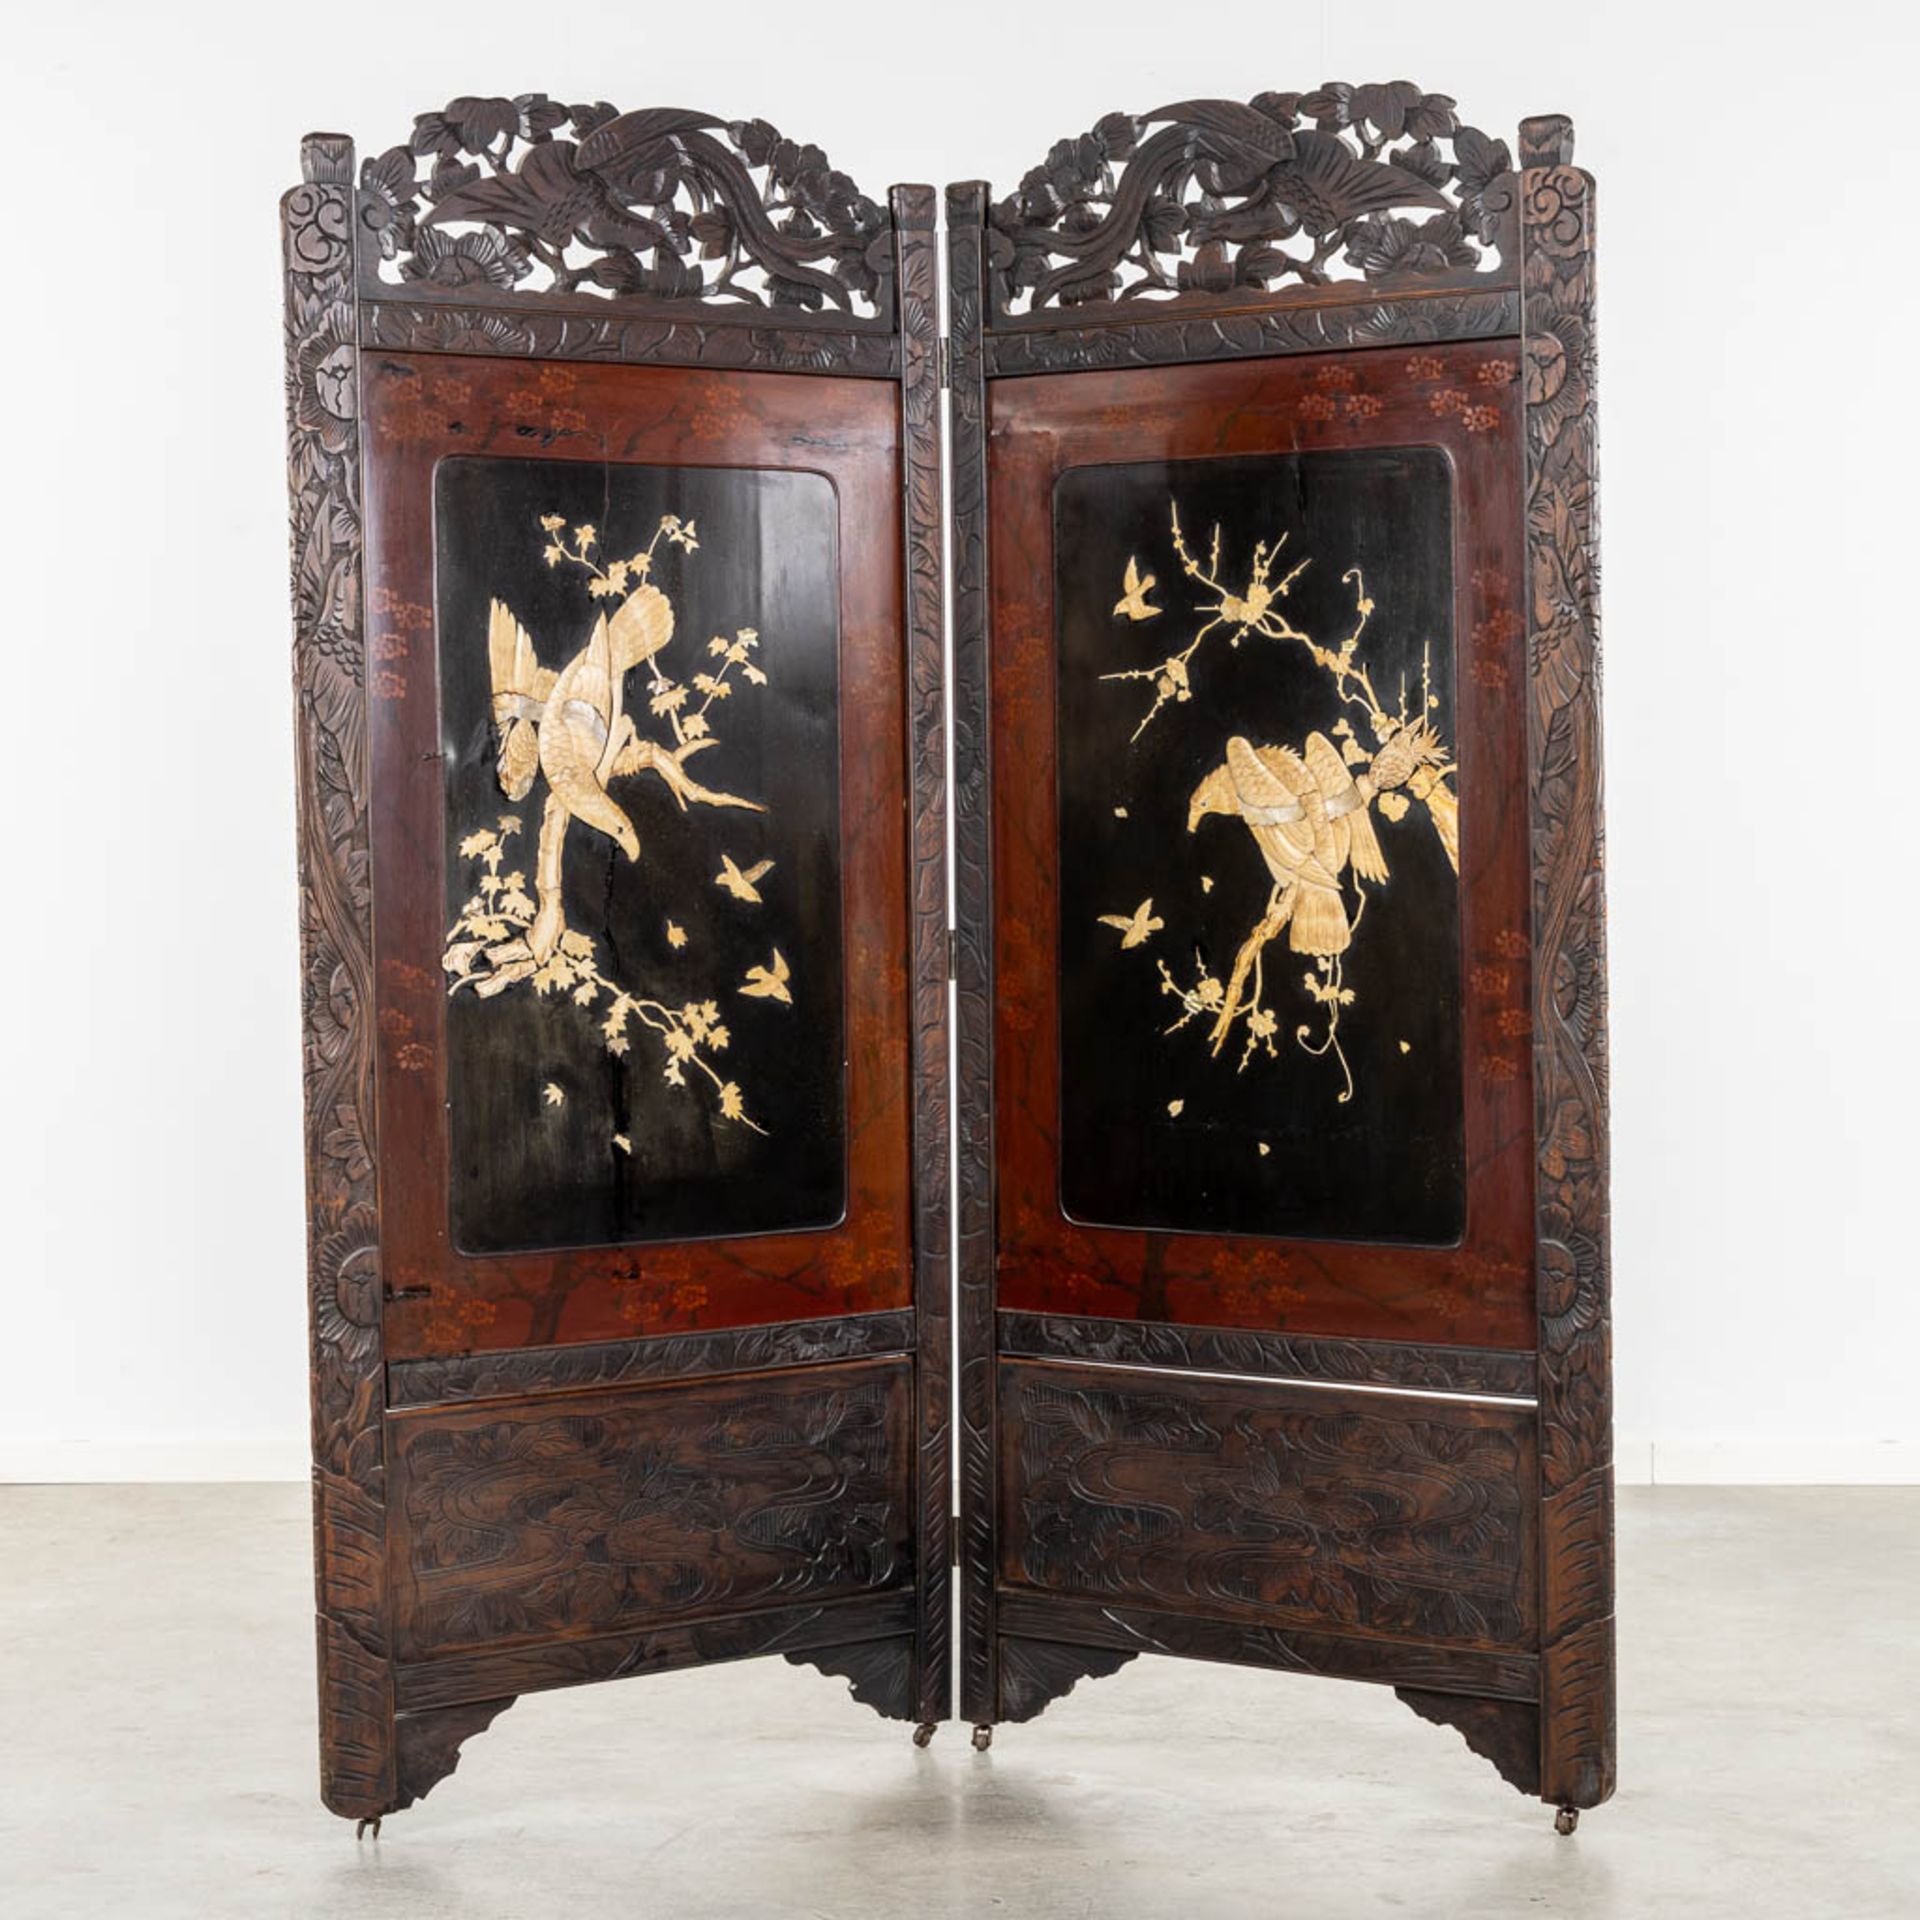 A two-fold Japanese Shibayama inlay room divider, decorated with Eagles. Meji, 19th C. (W:172 x H:18